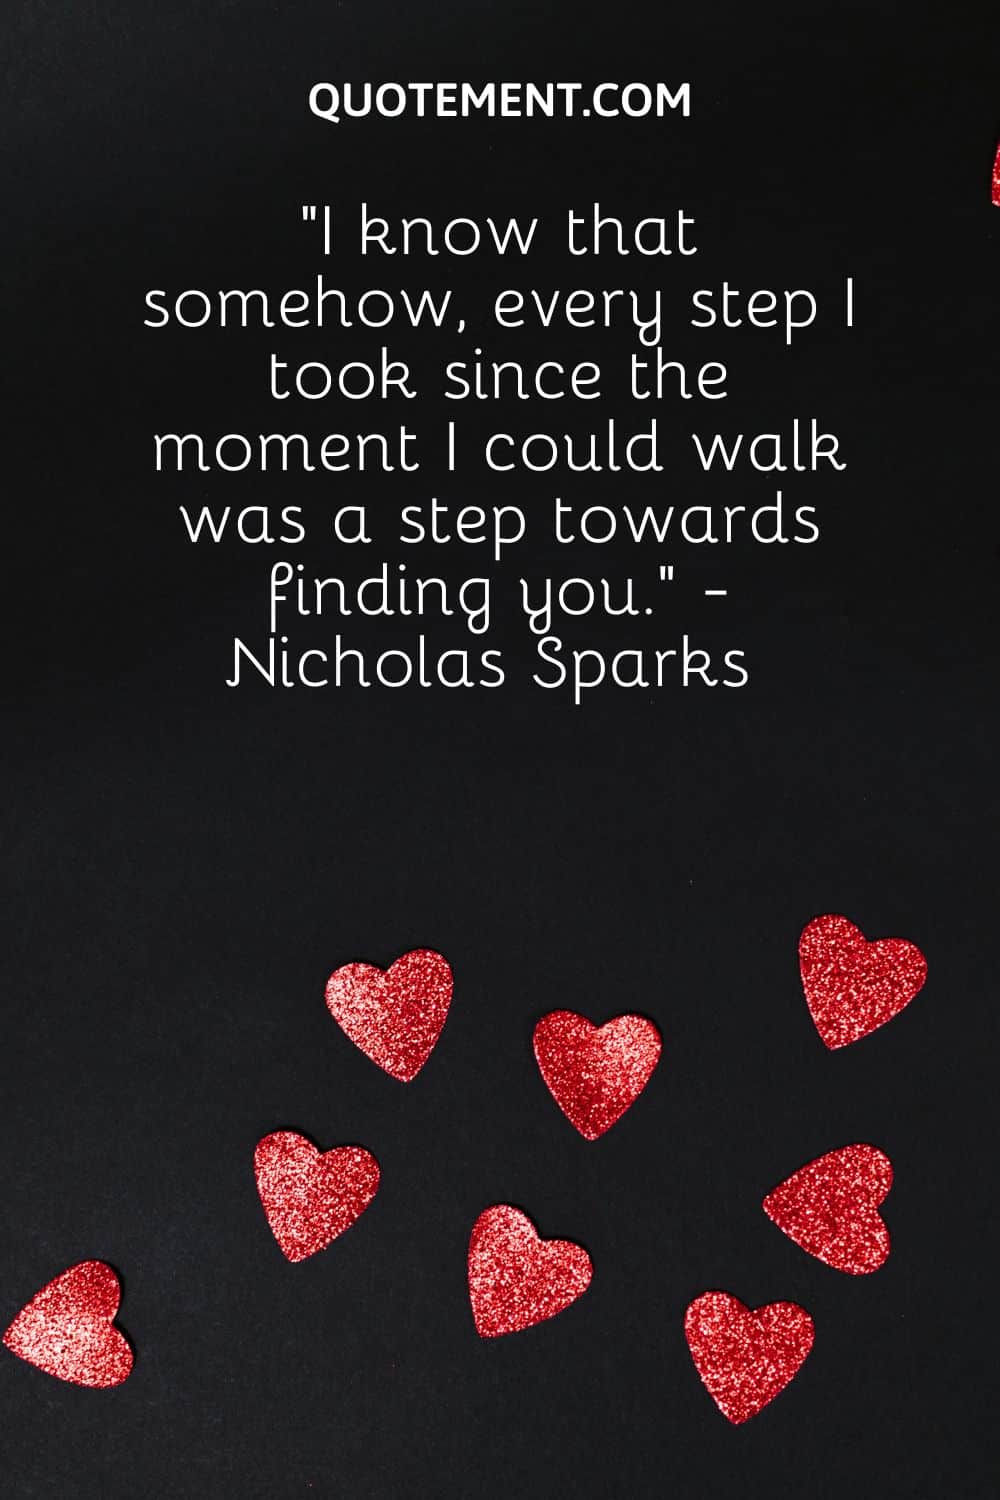 “I know that somehow, every step I took since the moment I could walk was a step towards finding you.” - Nicholas Sparks 